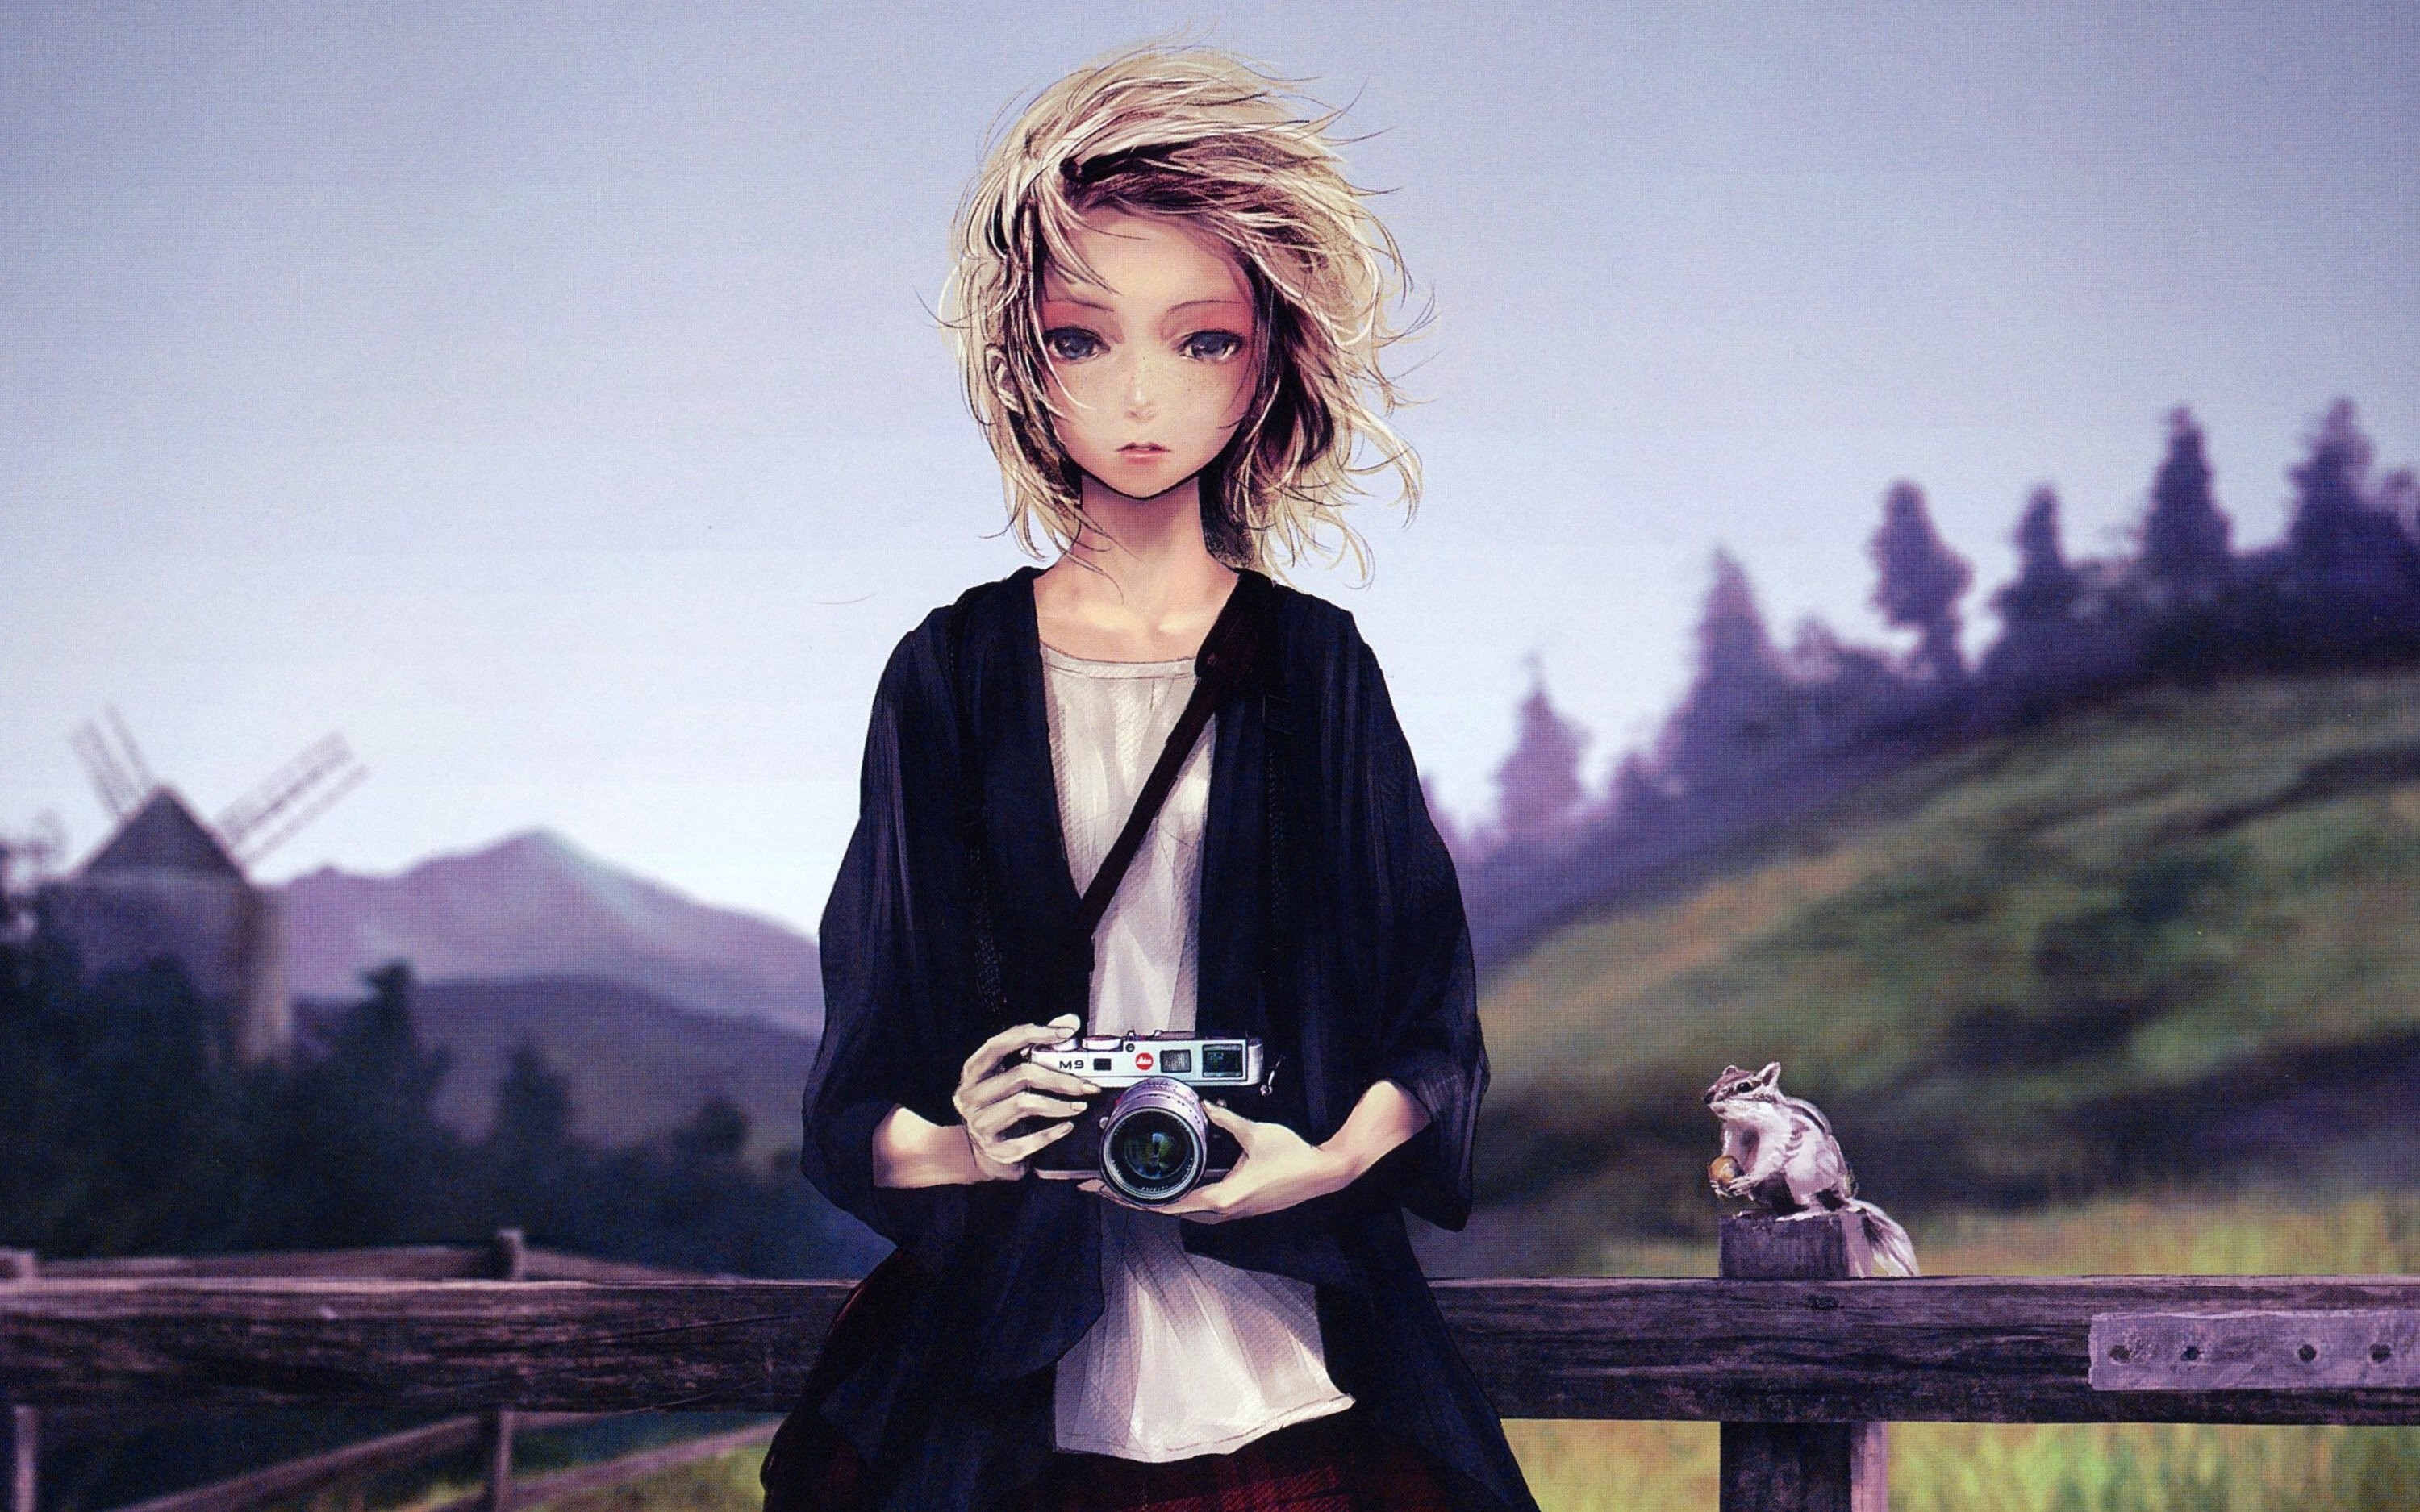 Anime Girl With Camera - HD Wallpaper 